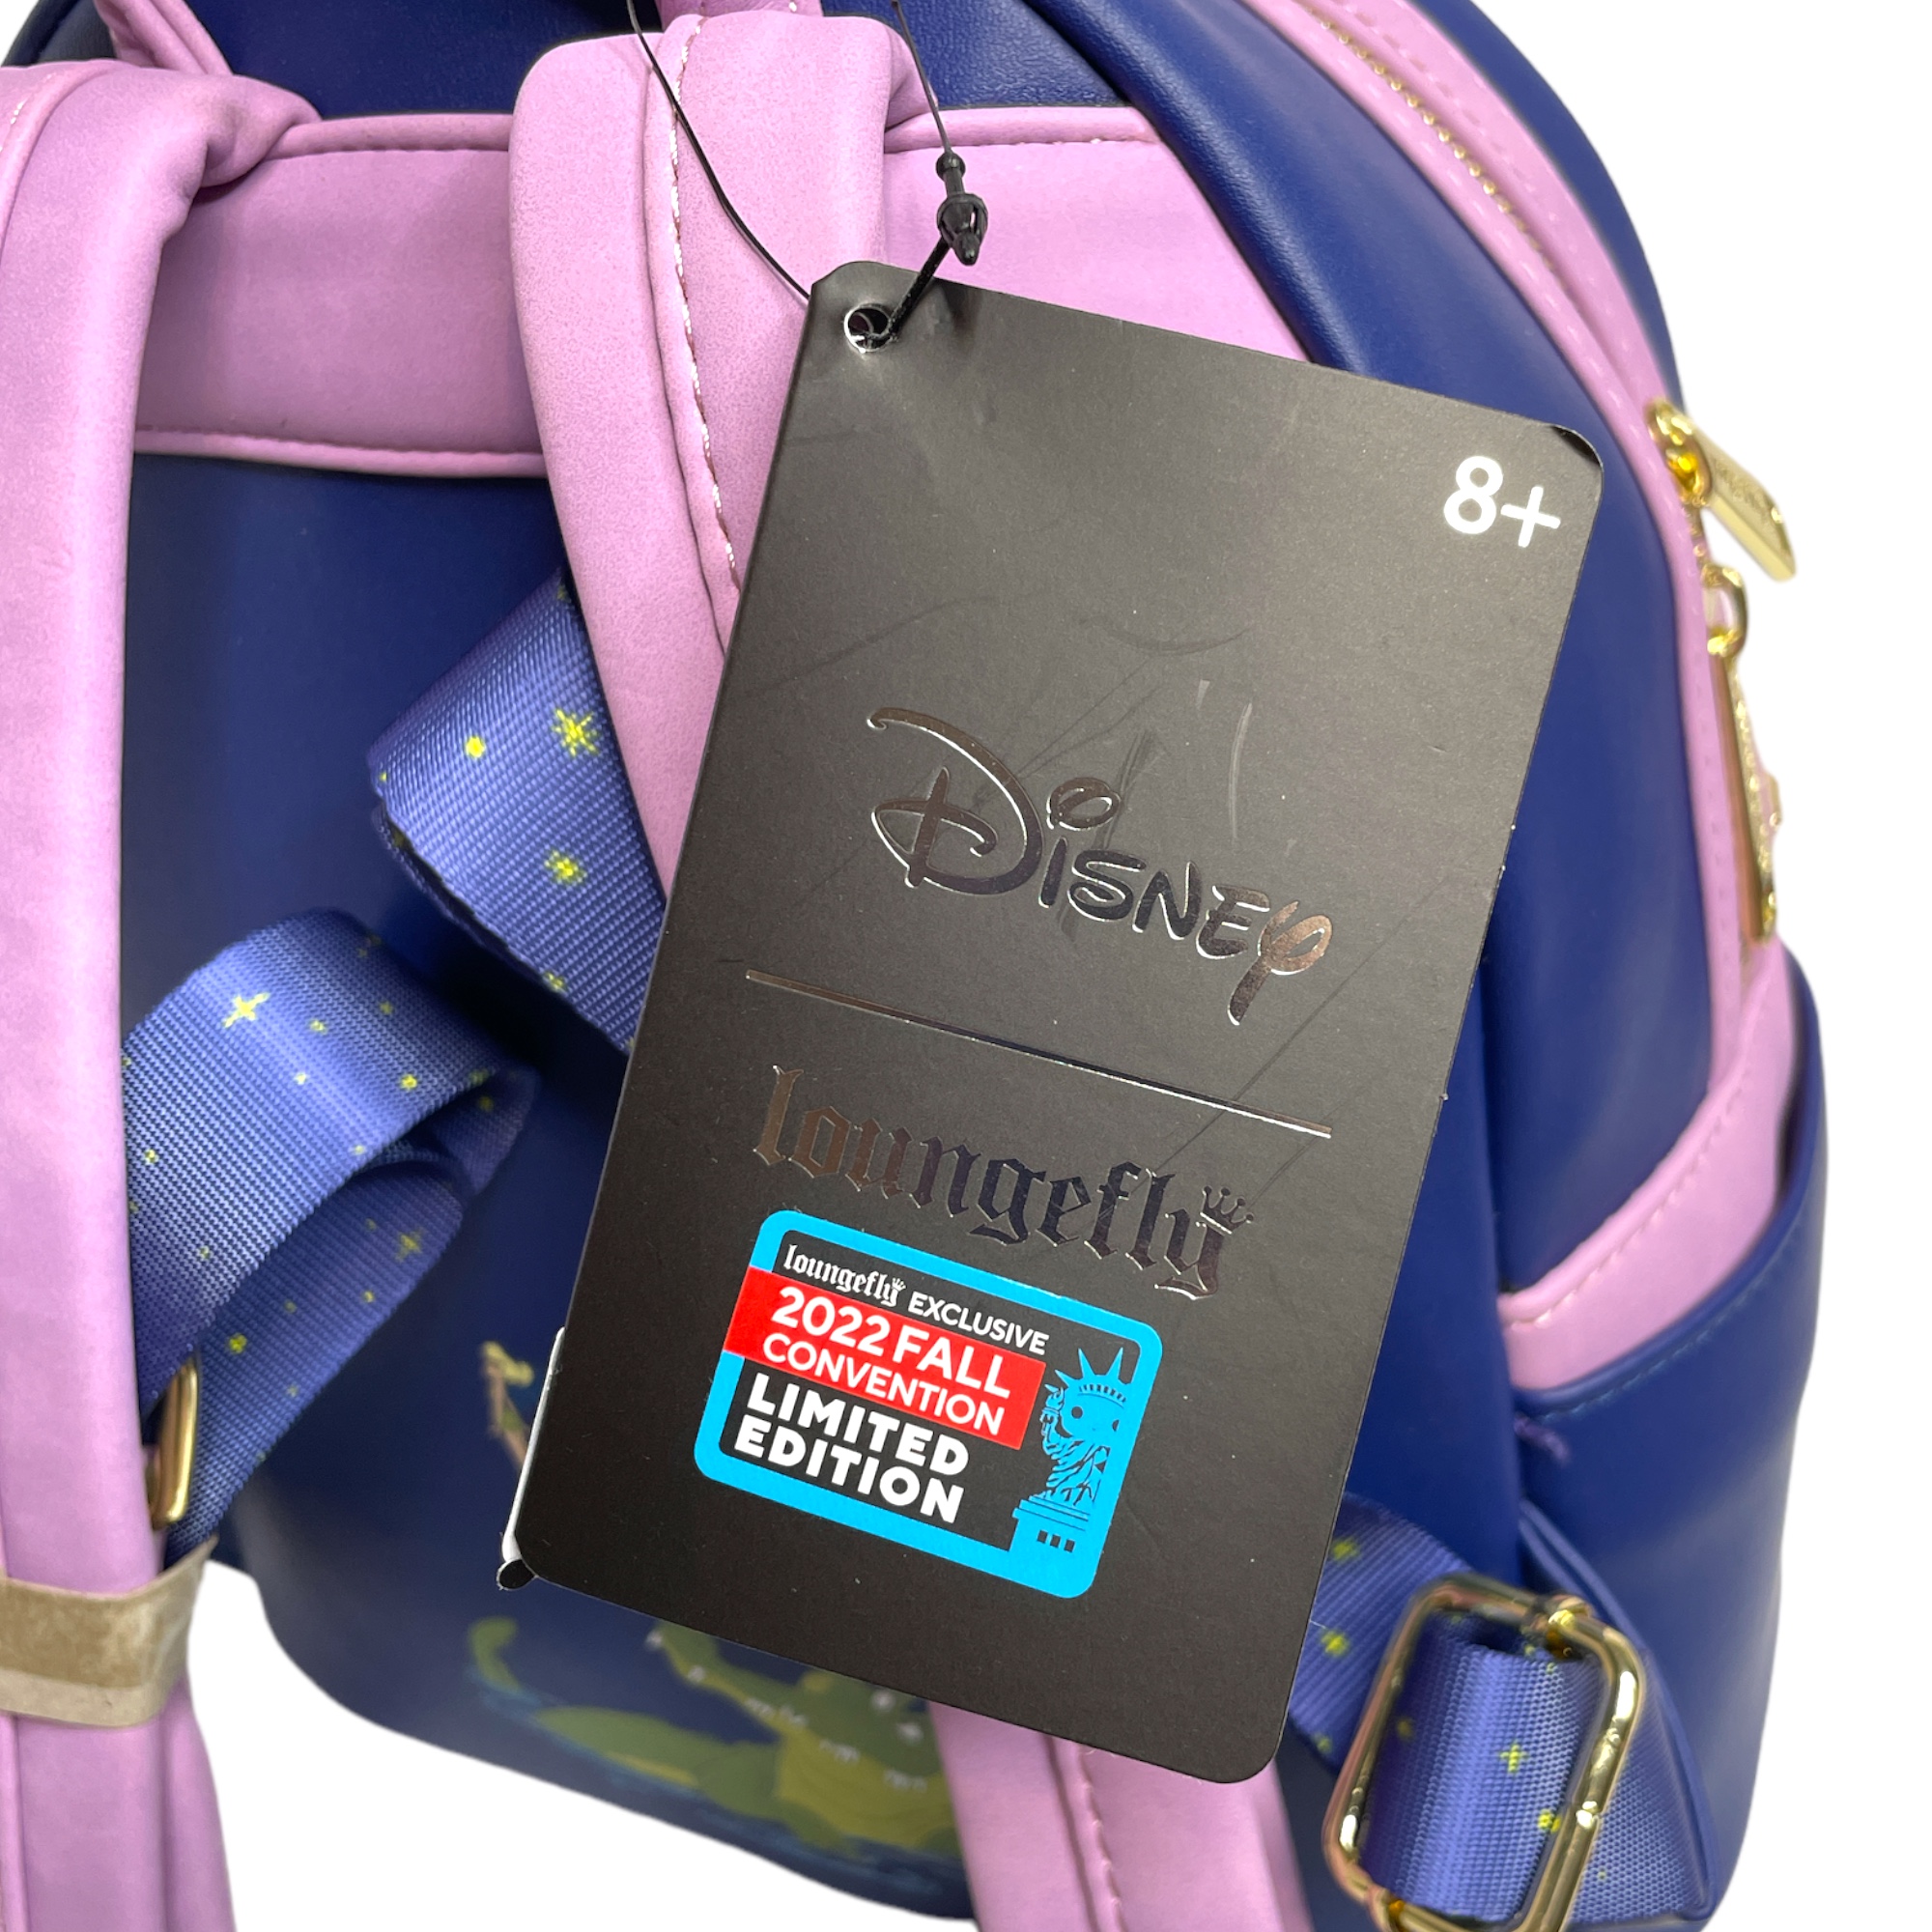 Loungefly Disney Peter Pan Rucksack (Fall Convention Limited Edition)